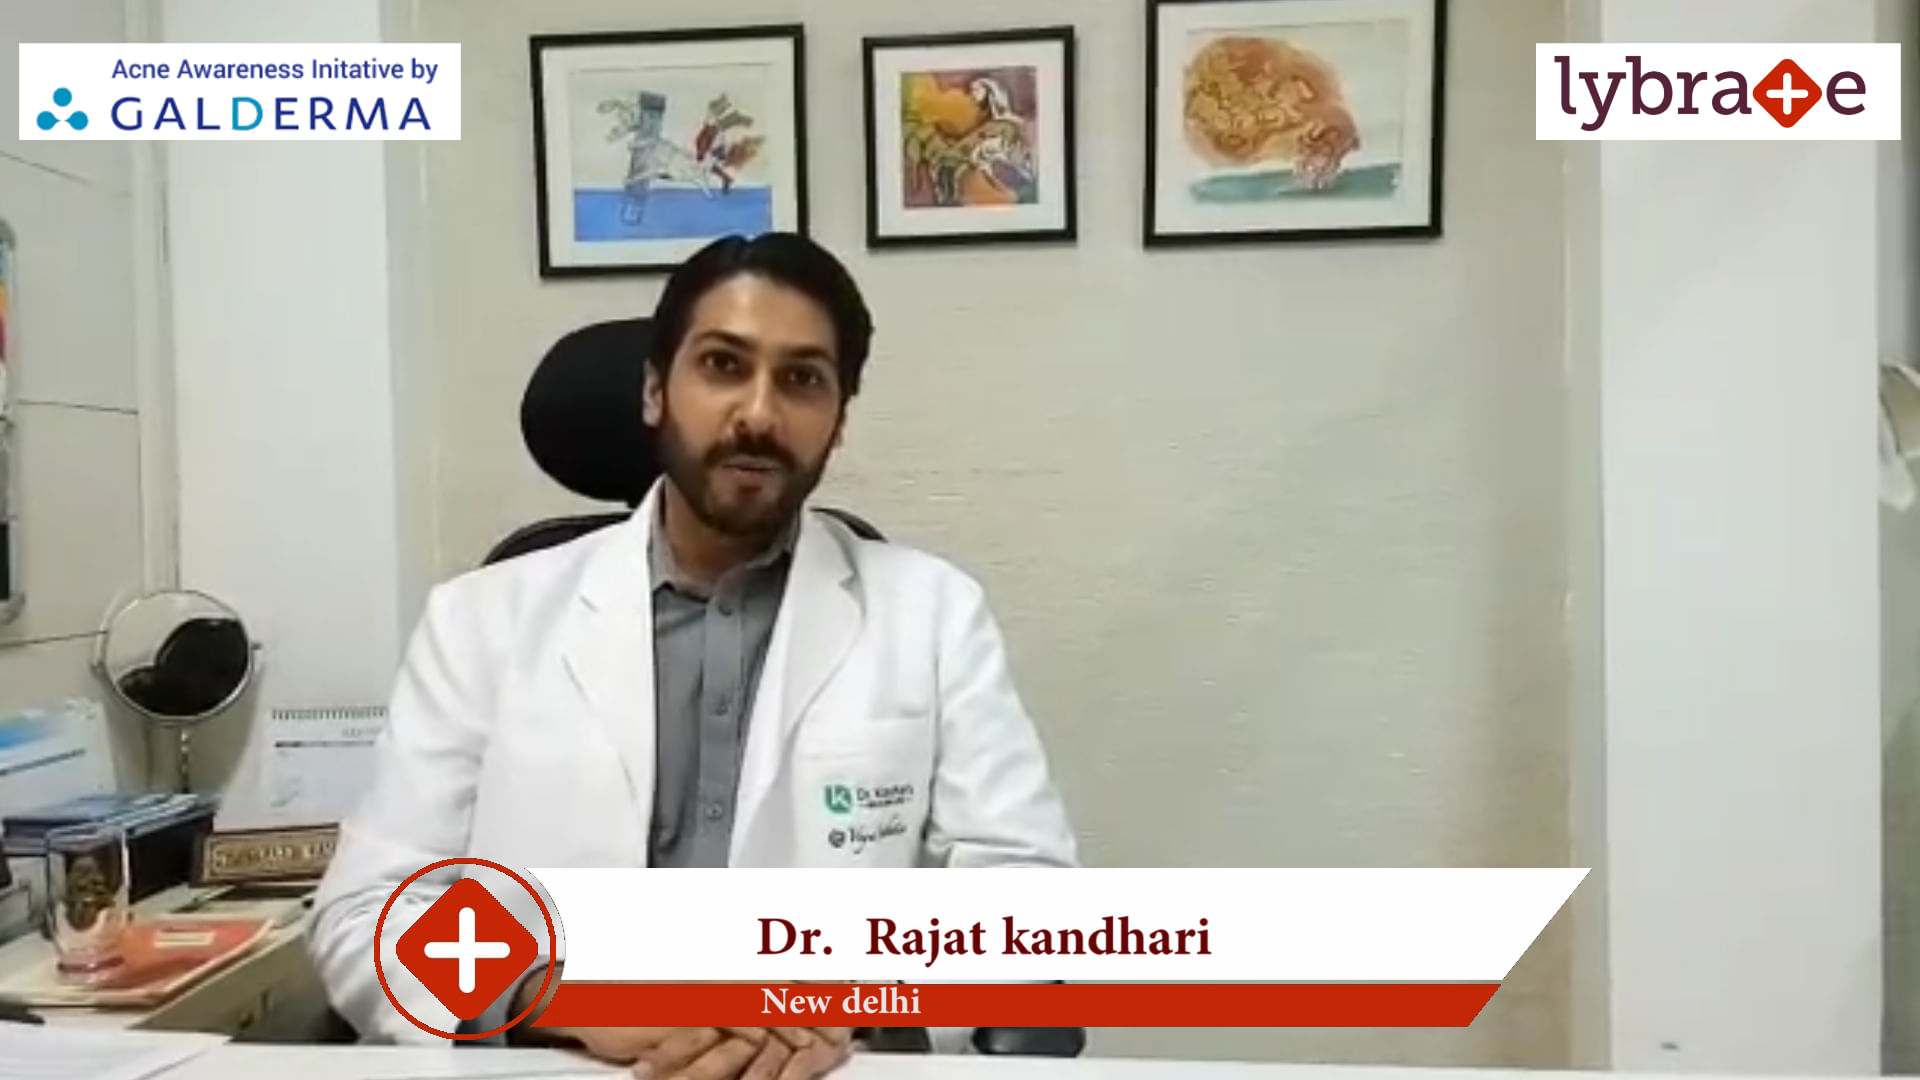 Lybrate | Dr. Rajat Kandhari speaks on IMPORTANCE OF TREATING ACNE EARLY